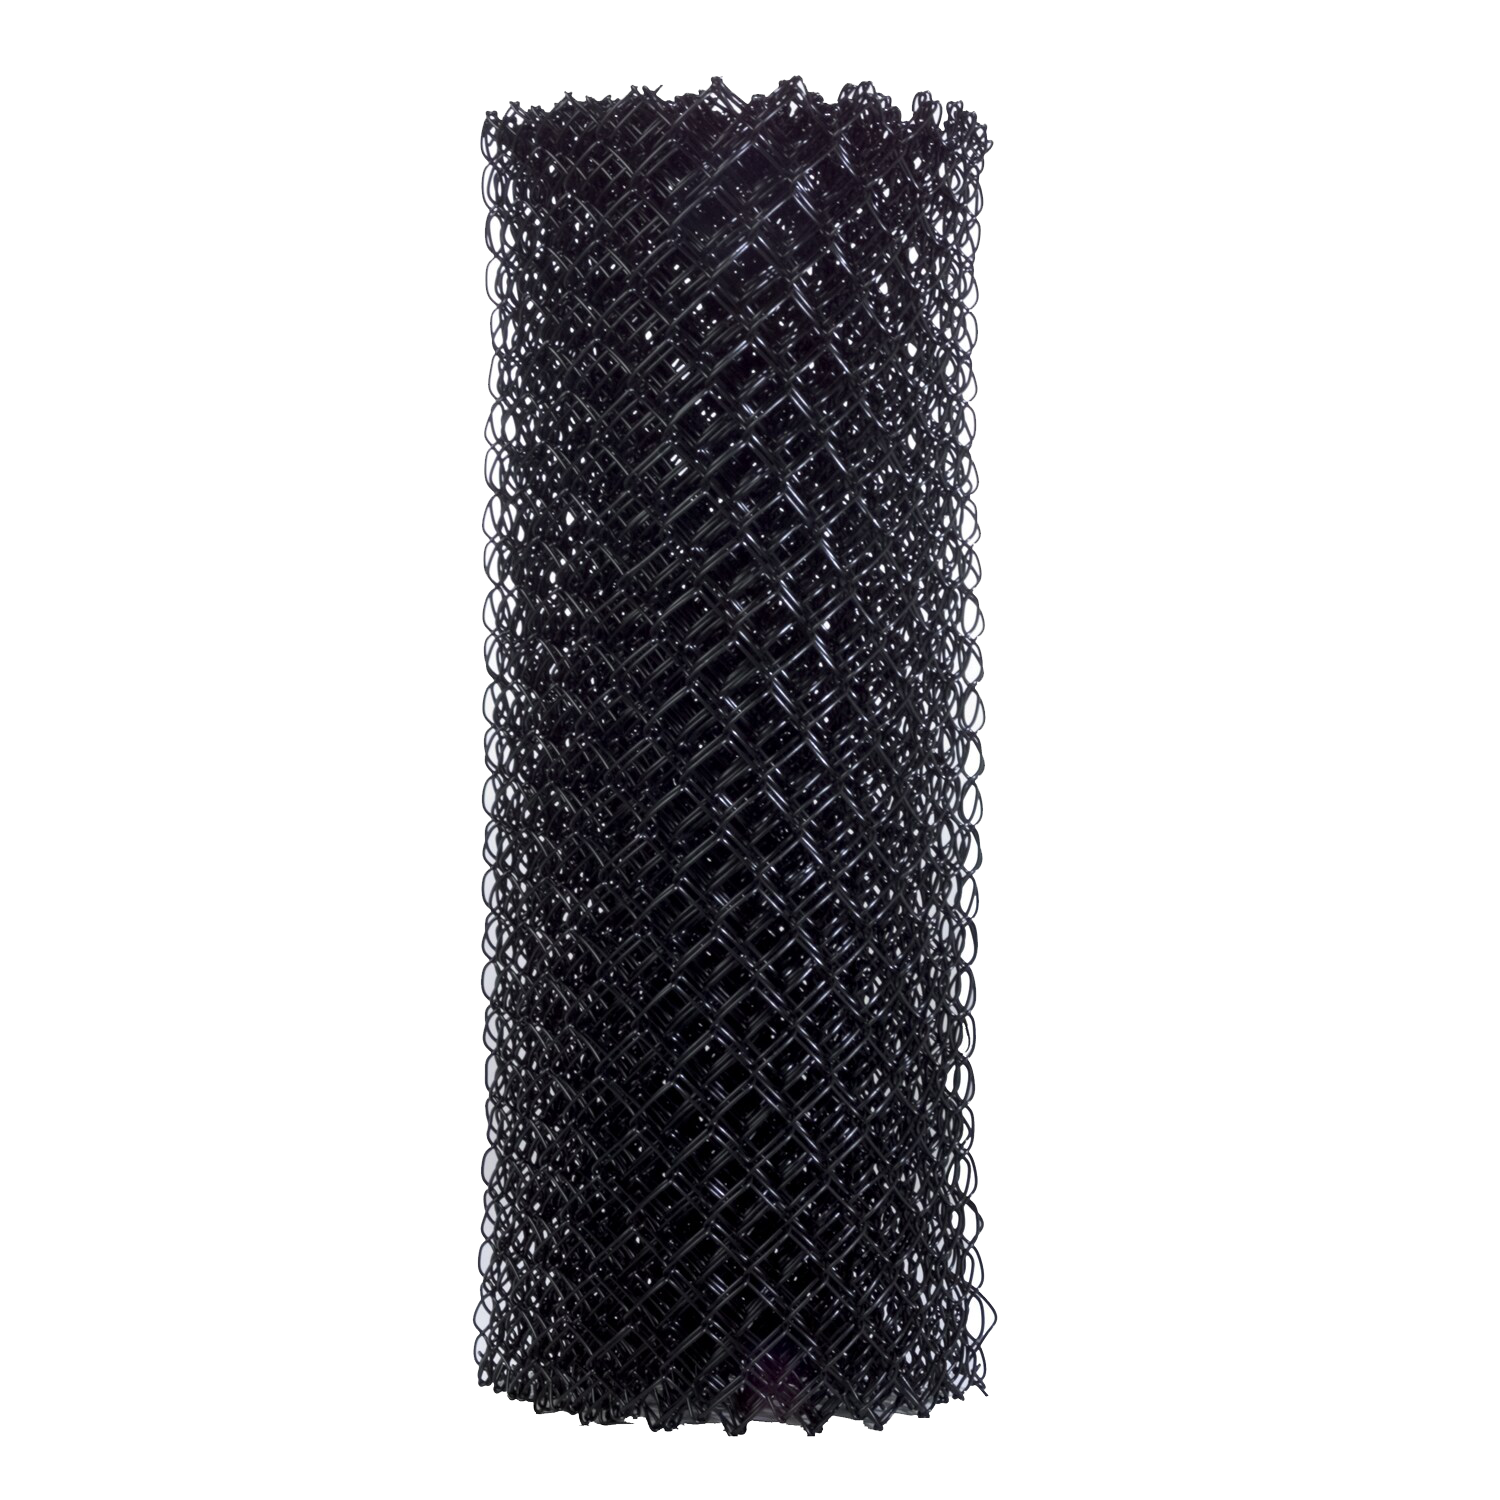 Fening Fusion Bonded Black Chain Link Netting